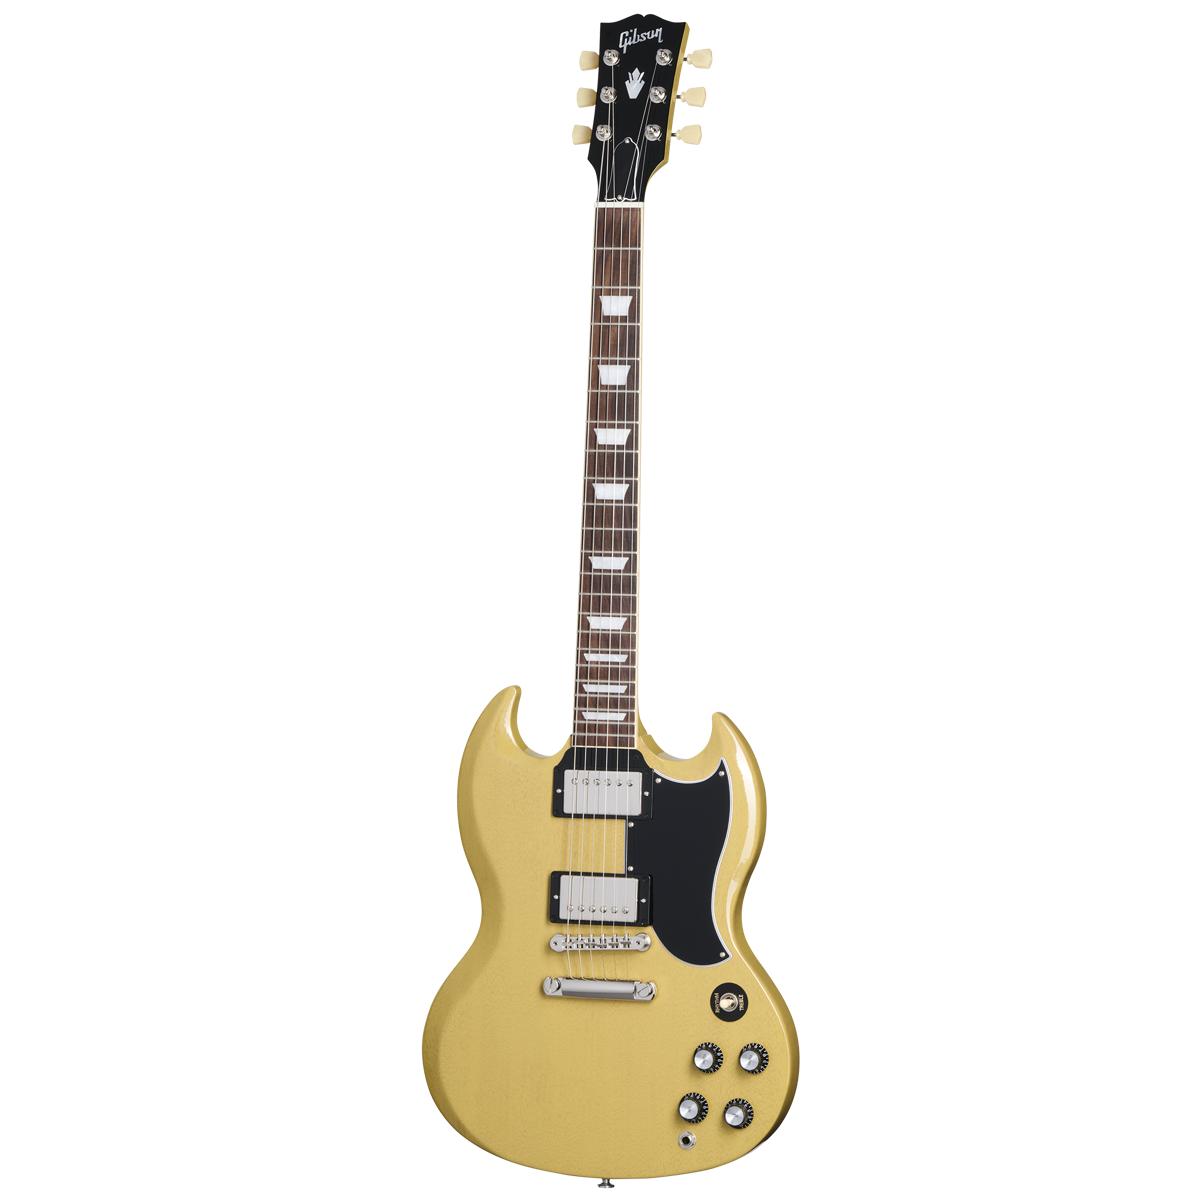 Gibson SG Standard 61 Electric Guitar TV Yellow w/ Hardcase - SG6100TVNH1